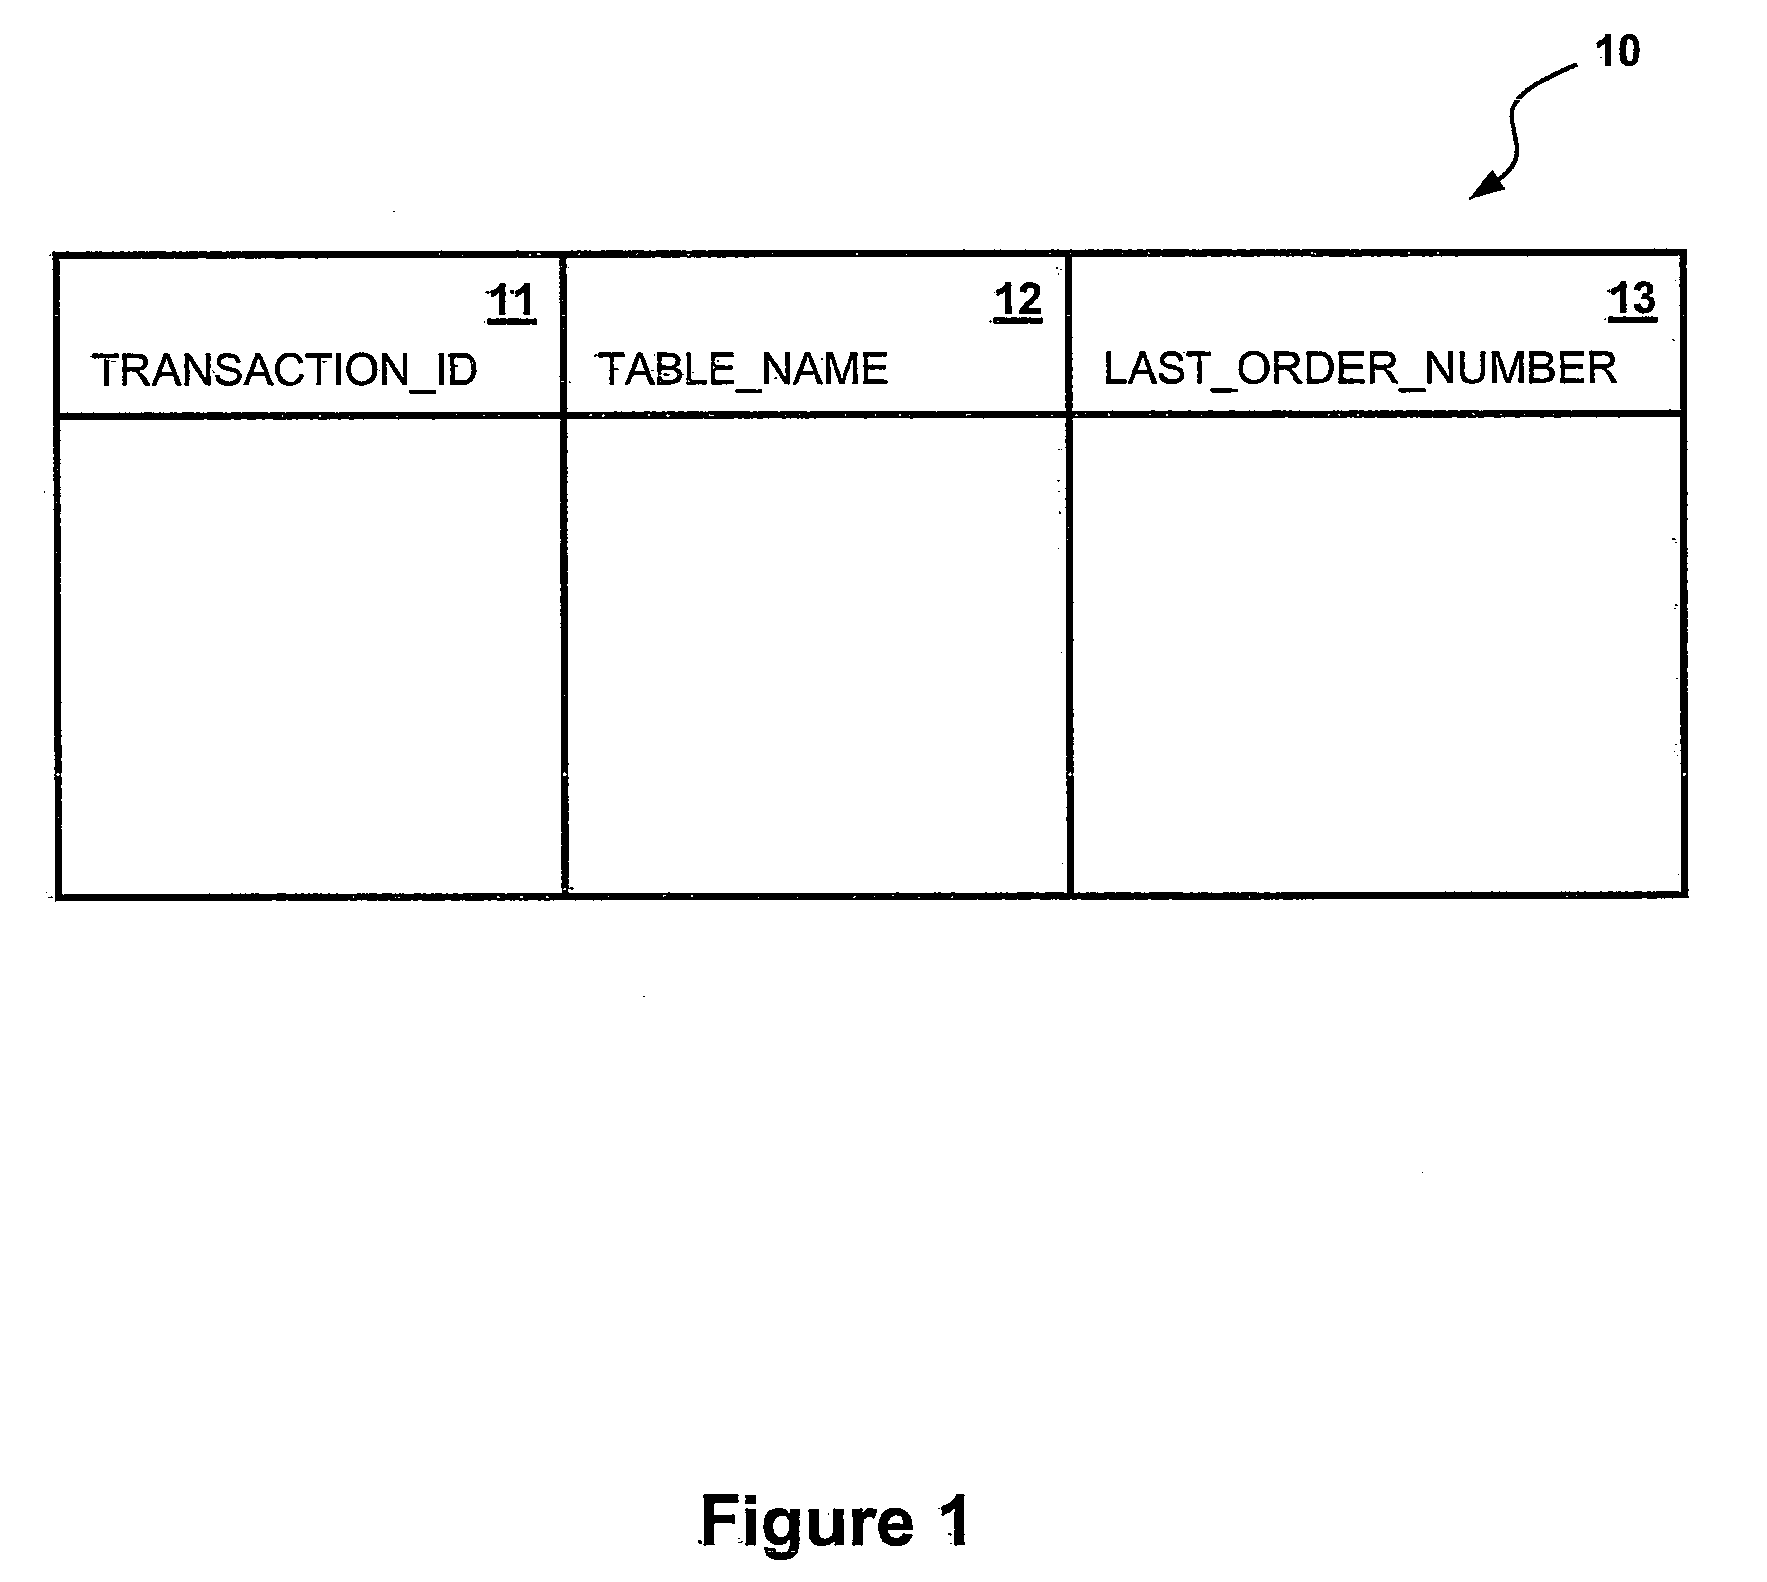 Method and system for generating a transaction-bound sequence of records in a relational database table